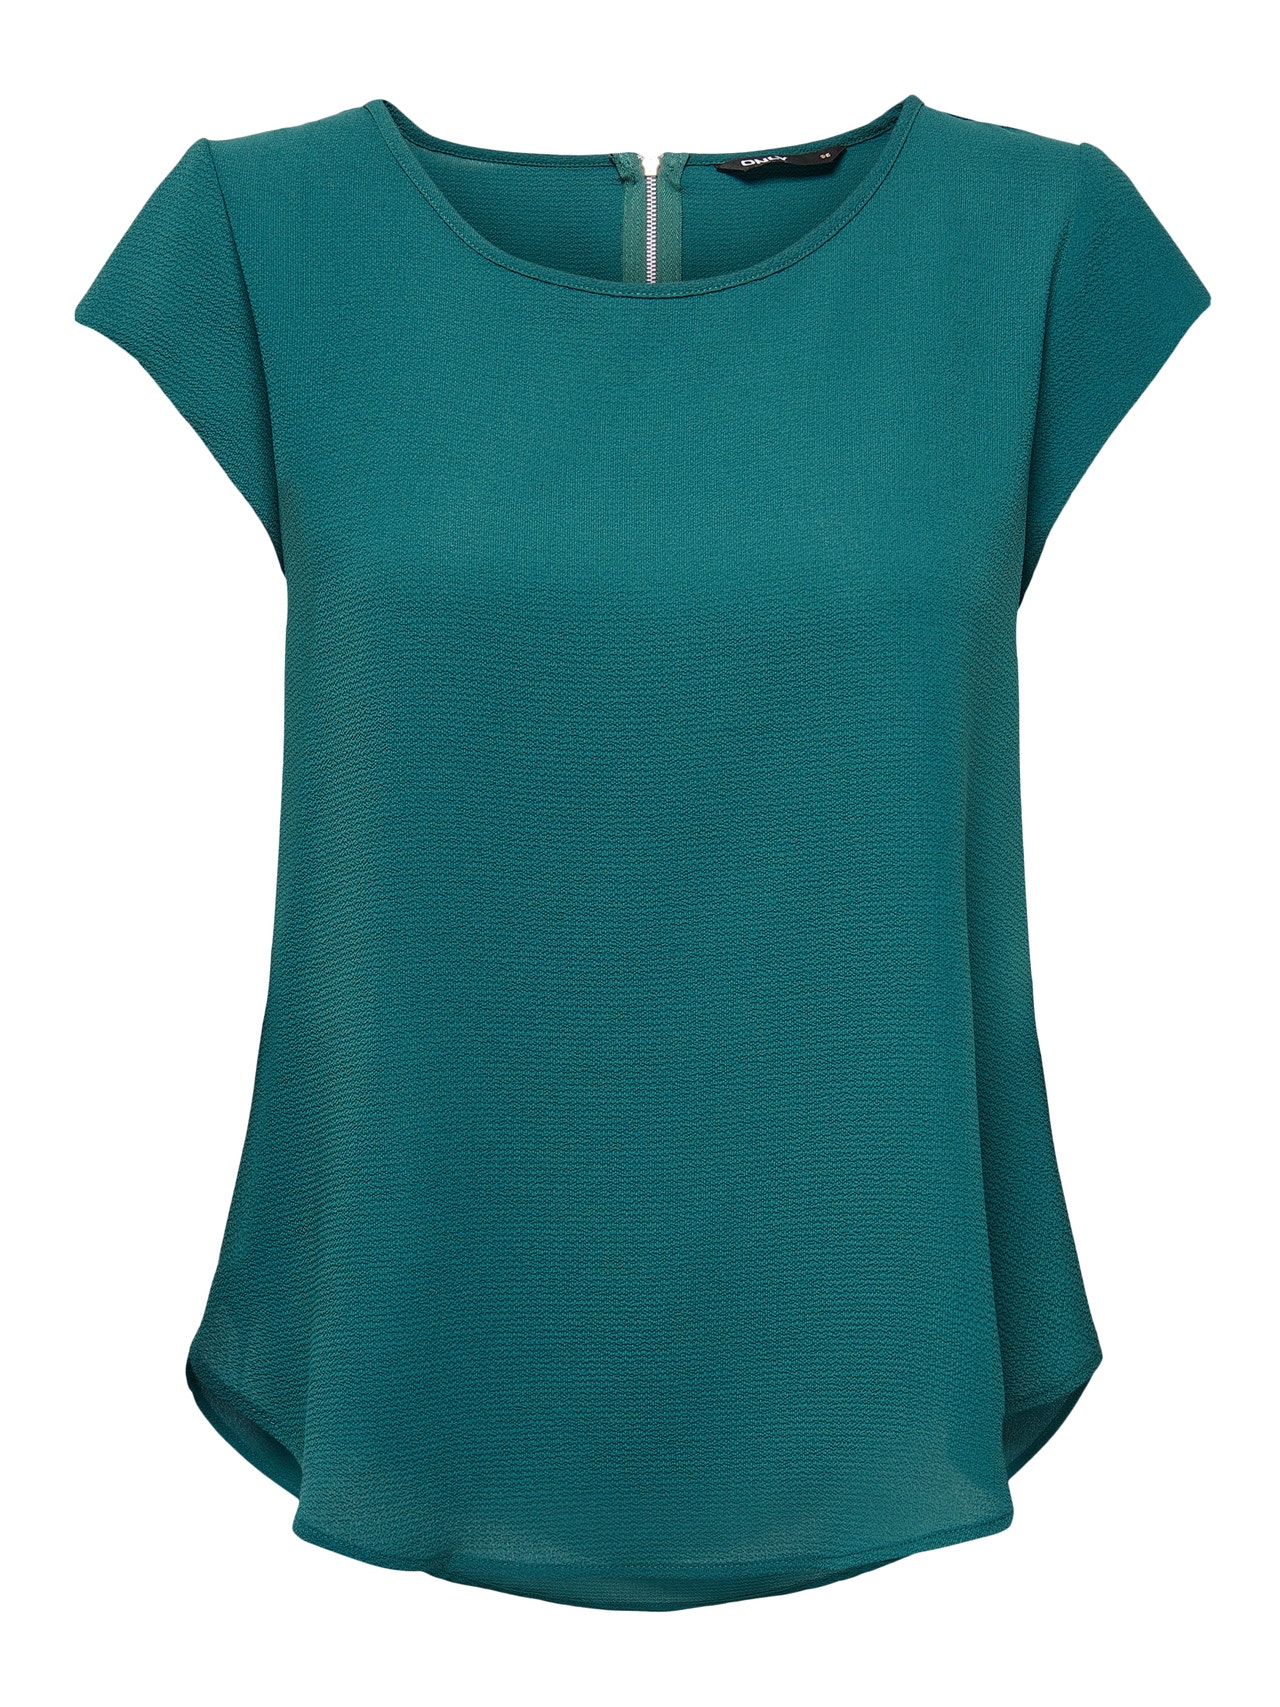 ONLY Regular Fit Round Neck Top -Deep Teal - 15142784